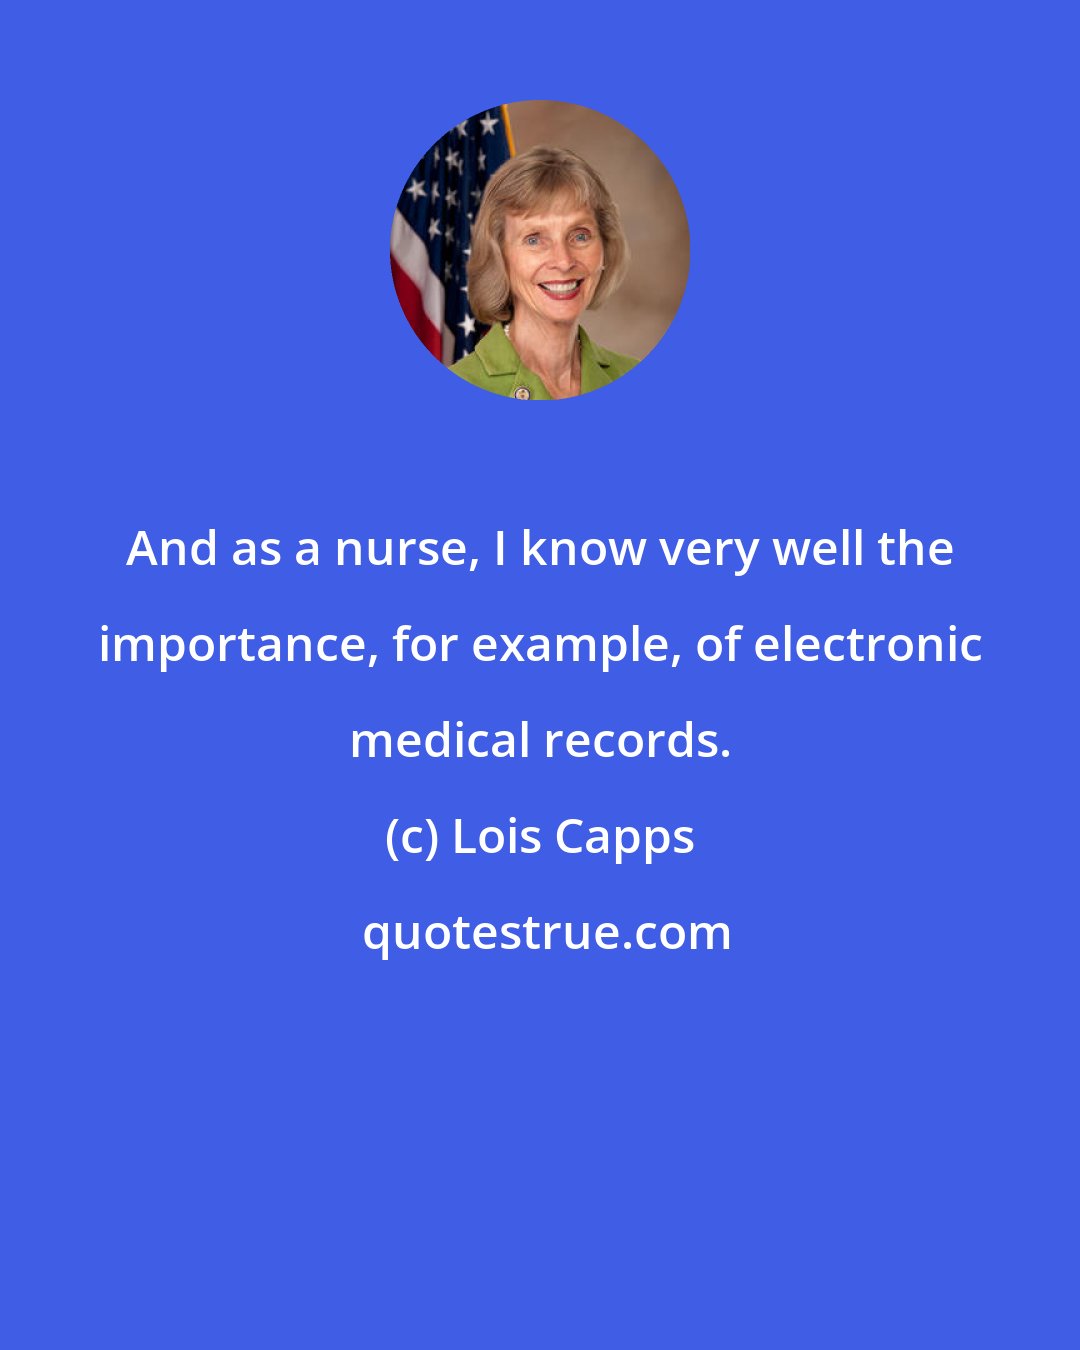 Lois Capps: And as a nurse, I know very well the importance, for example, of electronic medical records.